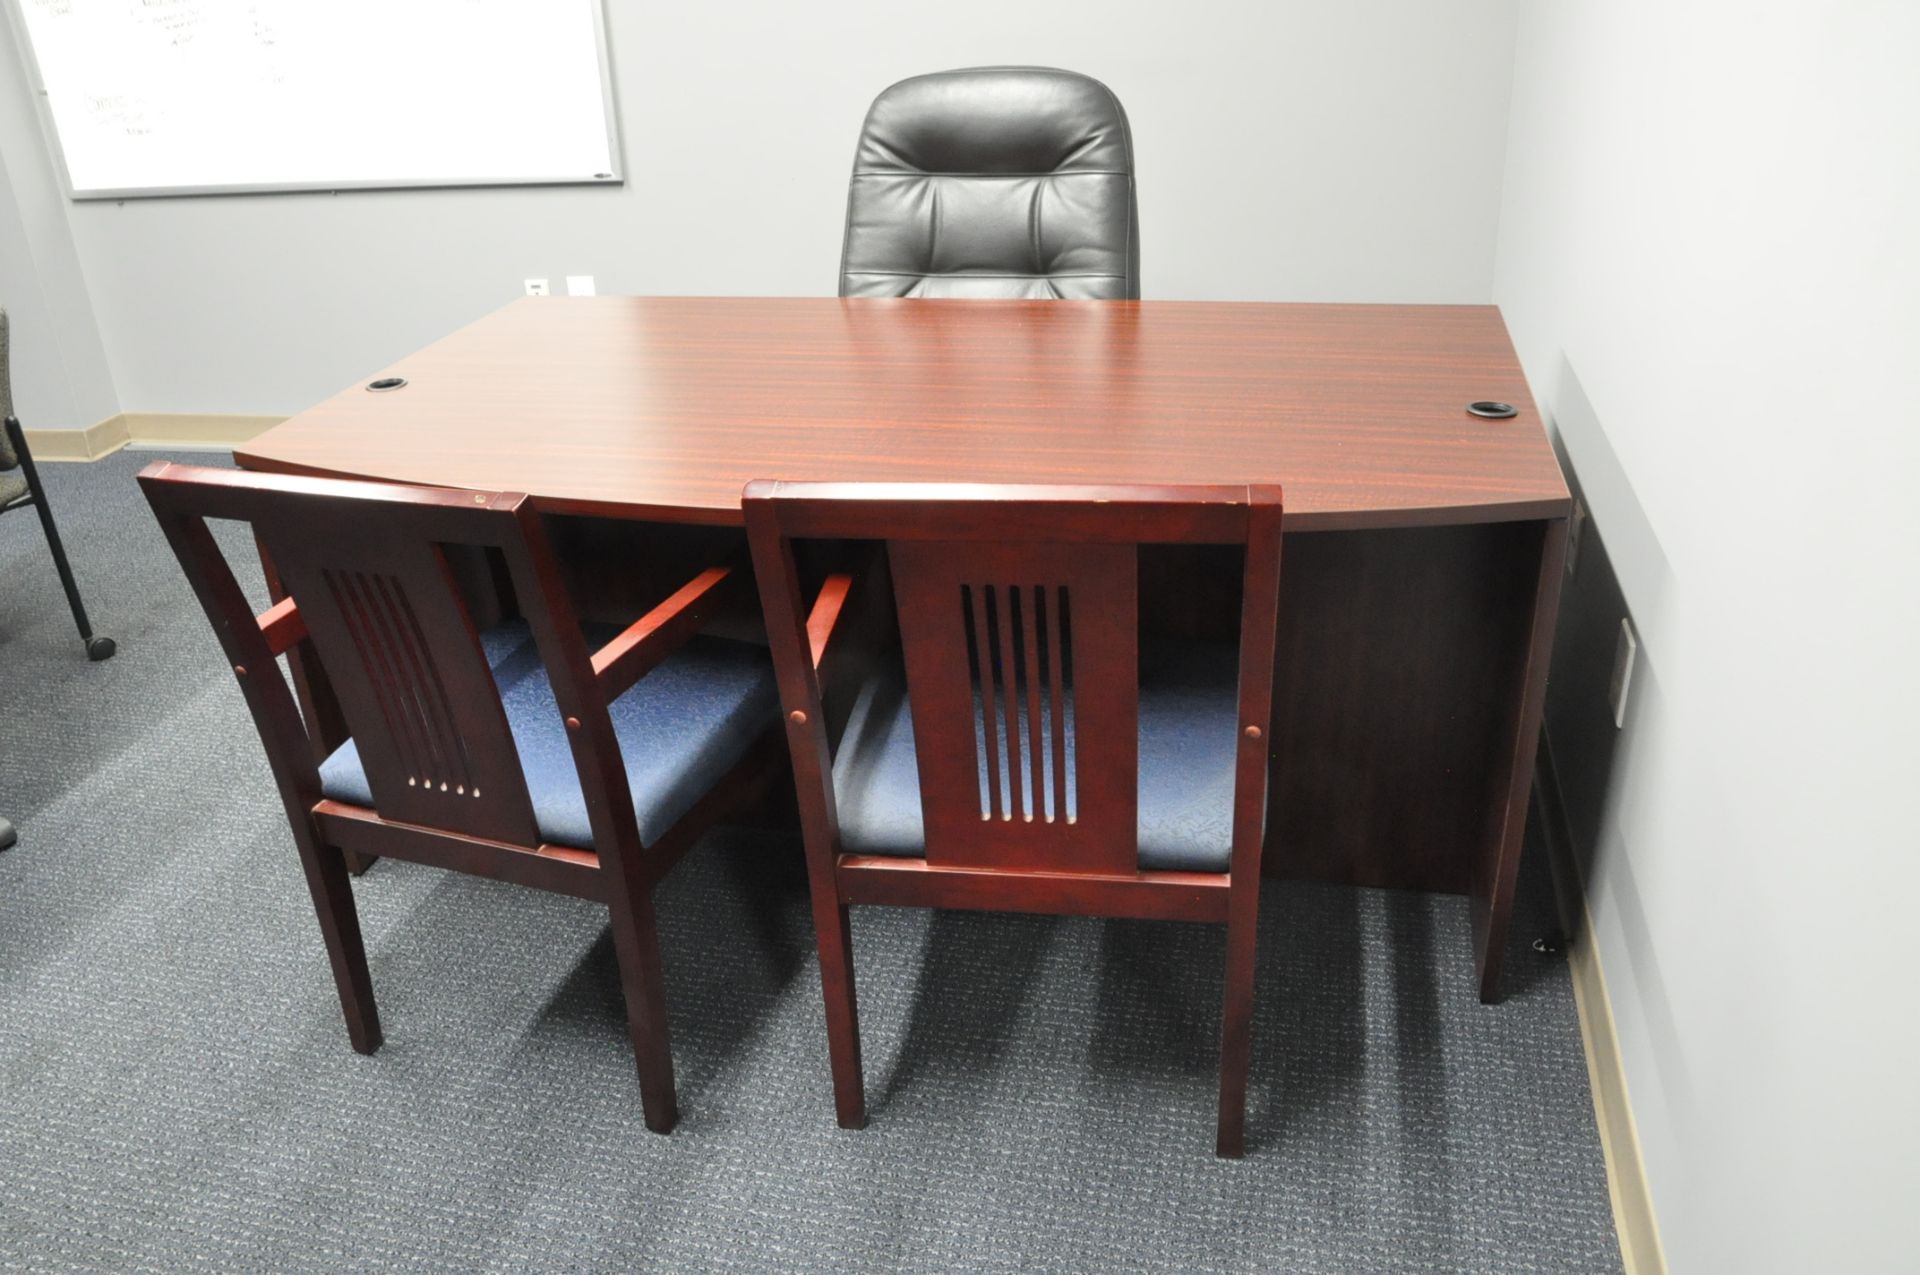 Lot-Desk, (7) Chairs, Table, Bookcase, Lateral File Cabinet and Dry Erase Board in (1) Office